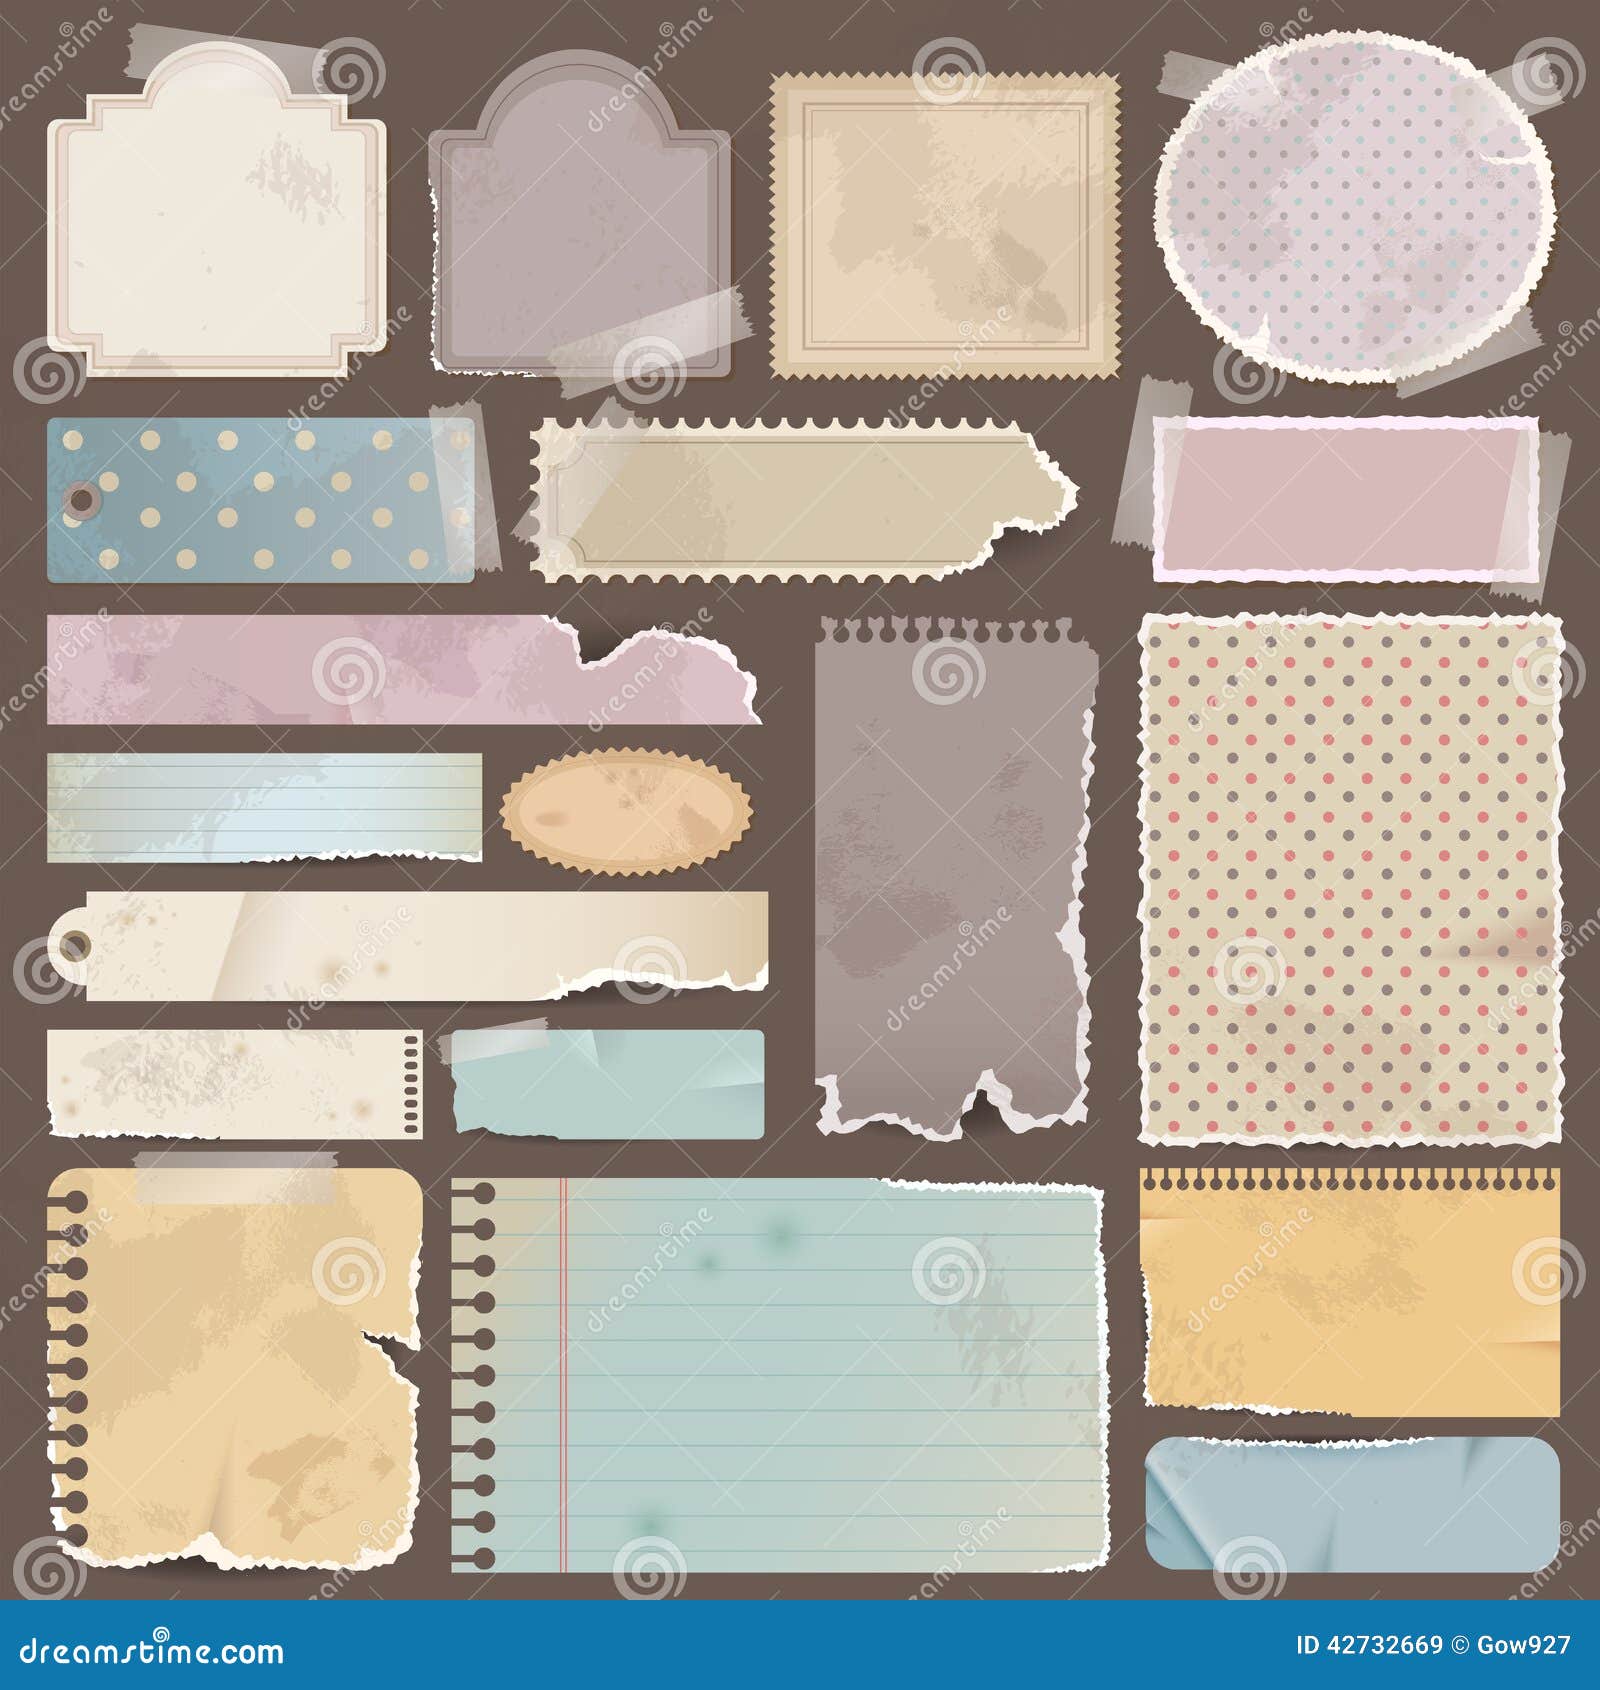 various old remnant pieces of paper, scrapbook, an